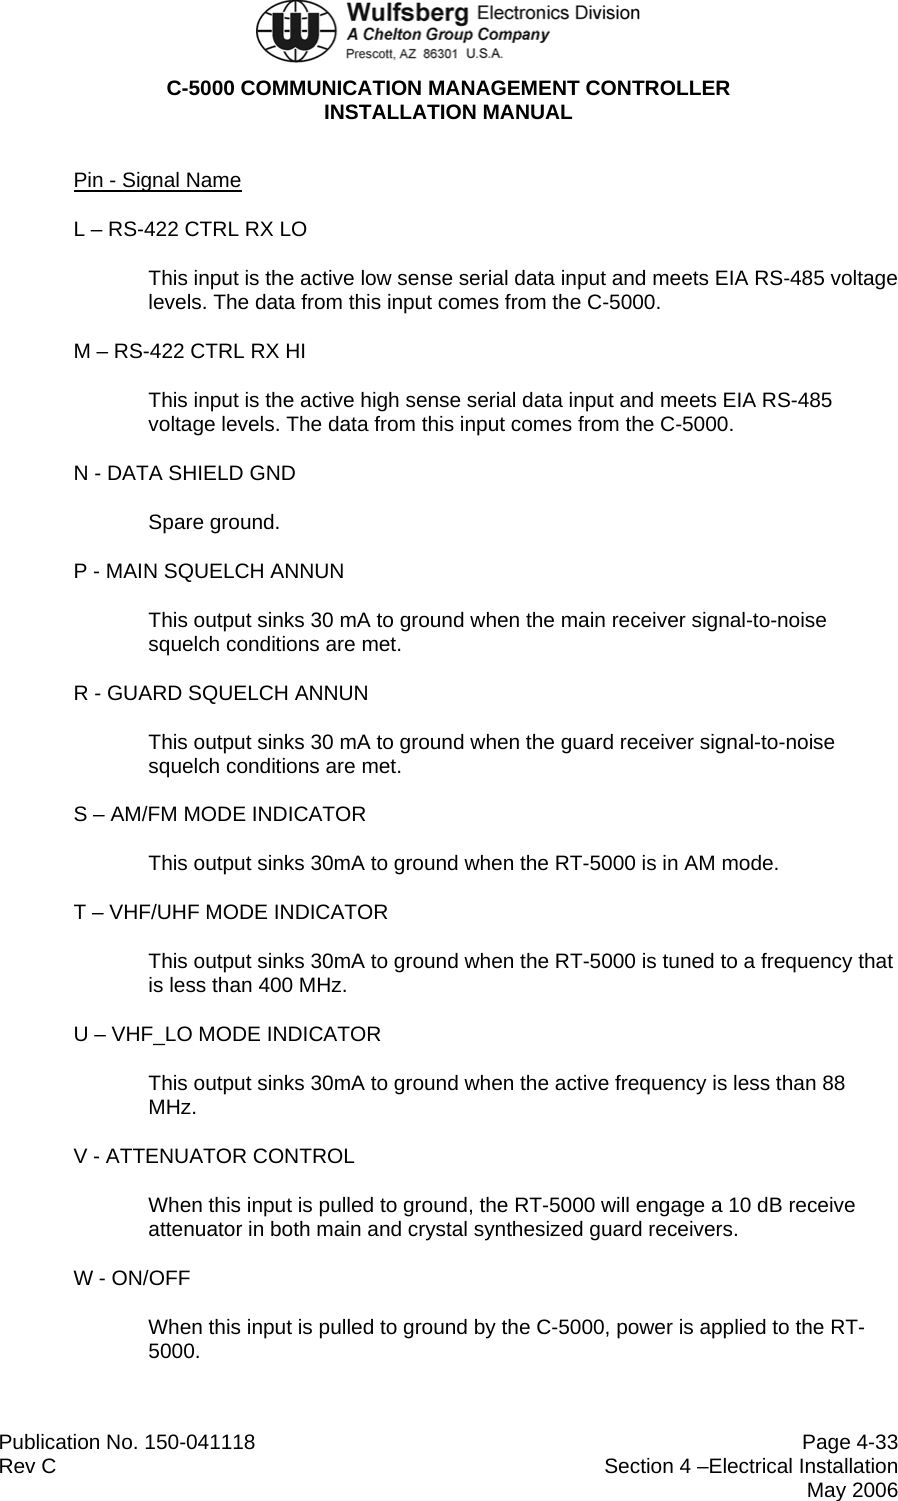  C-5000 COMMUNICATION MANAGEMENT CONTROLLER INSTALLATION MANUAL  Publication No. 150-041118  Page 4-33 Rev C  Section 4 –Electrical Installation  May 2006 Pin - Signal Name L – RS-422 CTRL RX LO  This input is the active low sense serial data input and meets EIA RS-485 voltage levels. The data from this input comes from the C-5000. M – RS-422 CTRL RX HI  This input is the active high sense serial data input and meets EIA RS-485 voltage levels. The data from this input comes from the C-5000. N - DATA SHIELD GND  Spare ground. P - MAIN SQUELCH ANNUN  This output sinks 30 mA to ground when the main receiver signal-to-noise squelch conditions are met. R - GUARD SQUELCH ANNUN This output sinks 30 mA to ground when the guard receiver signal-to-noise squelch conditions are met. S – AM/FM MODE INDICATOR This output sinks 30mA to ground when the RT-5000 is in AM mode. T – VHF/UHF MODE INDICATOR This output sinks 30mA to ground when the RT-5000 is tuned to a frequency that is less than 400 MHz. U – VHF_LO MODE INDICATOR This output sinks 30mA to ground when the active frequency is less than 88 MHz. V - ATTENUATOR CONTROL When this input is pulled to ground, the RT-5000 will engage a 10 dB receive attenuator in both main and crystal synthesized guard receivers. W - ON/OFF When this input is pulled to ground by the C-5000, power is applied to the RT-5000. 